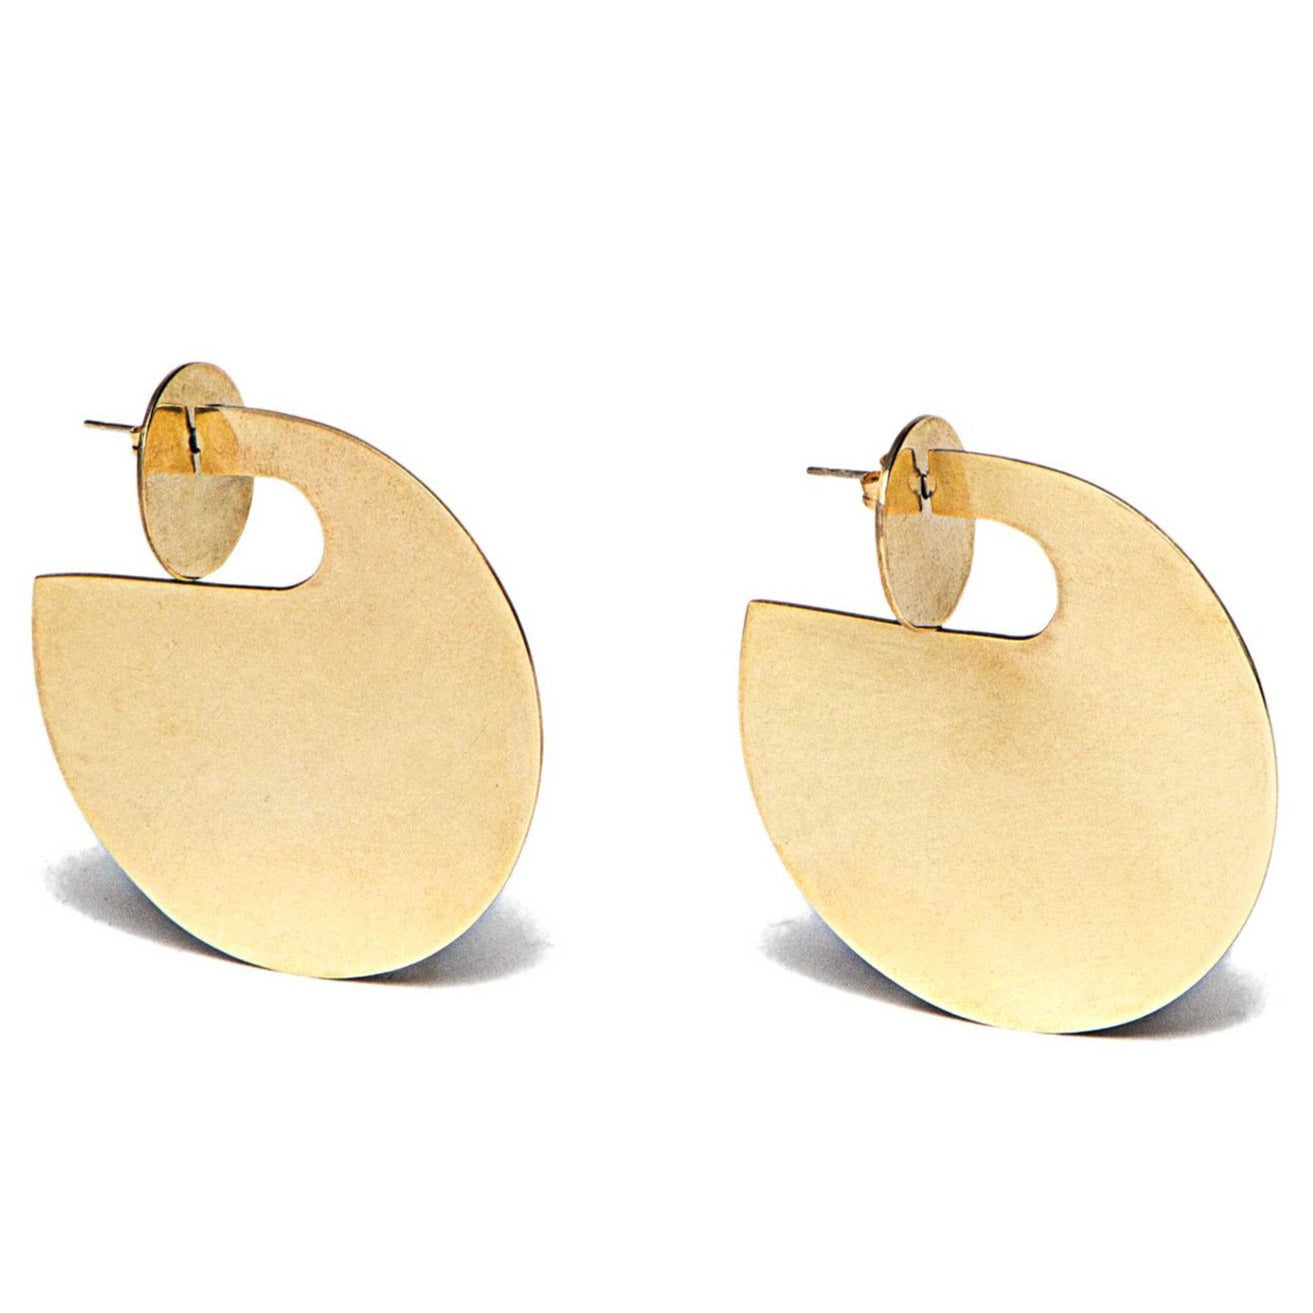 Accompany Exclusive Soko Double Coin Jacket Earring. Brass plate statement jacket earrings. Post fastening for pierced ears. Handcrafted in Kenya using traditional artisan techniques. 1.75 inch diameter. Color gold. 100% recycled brass. One size.